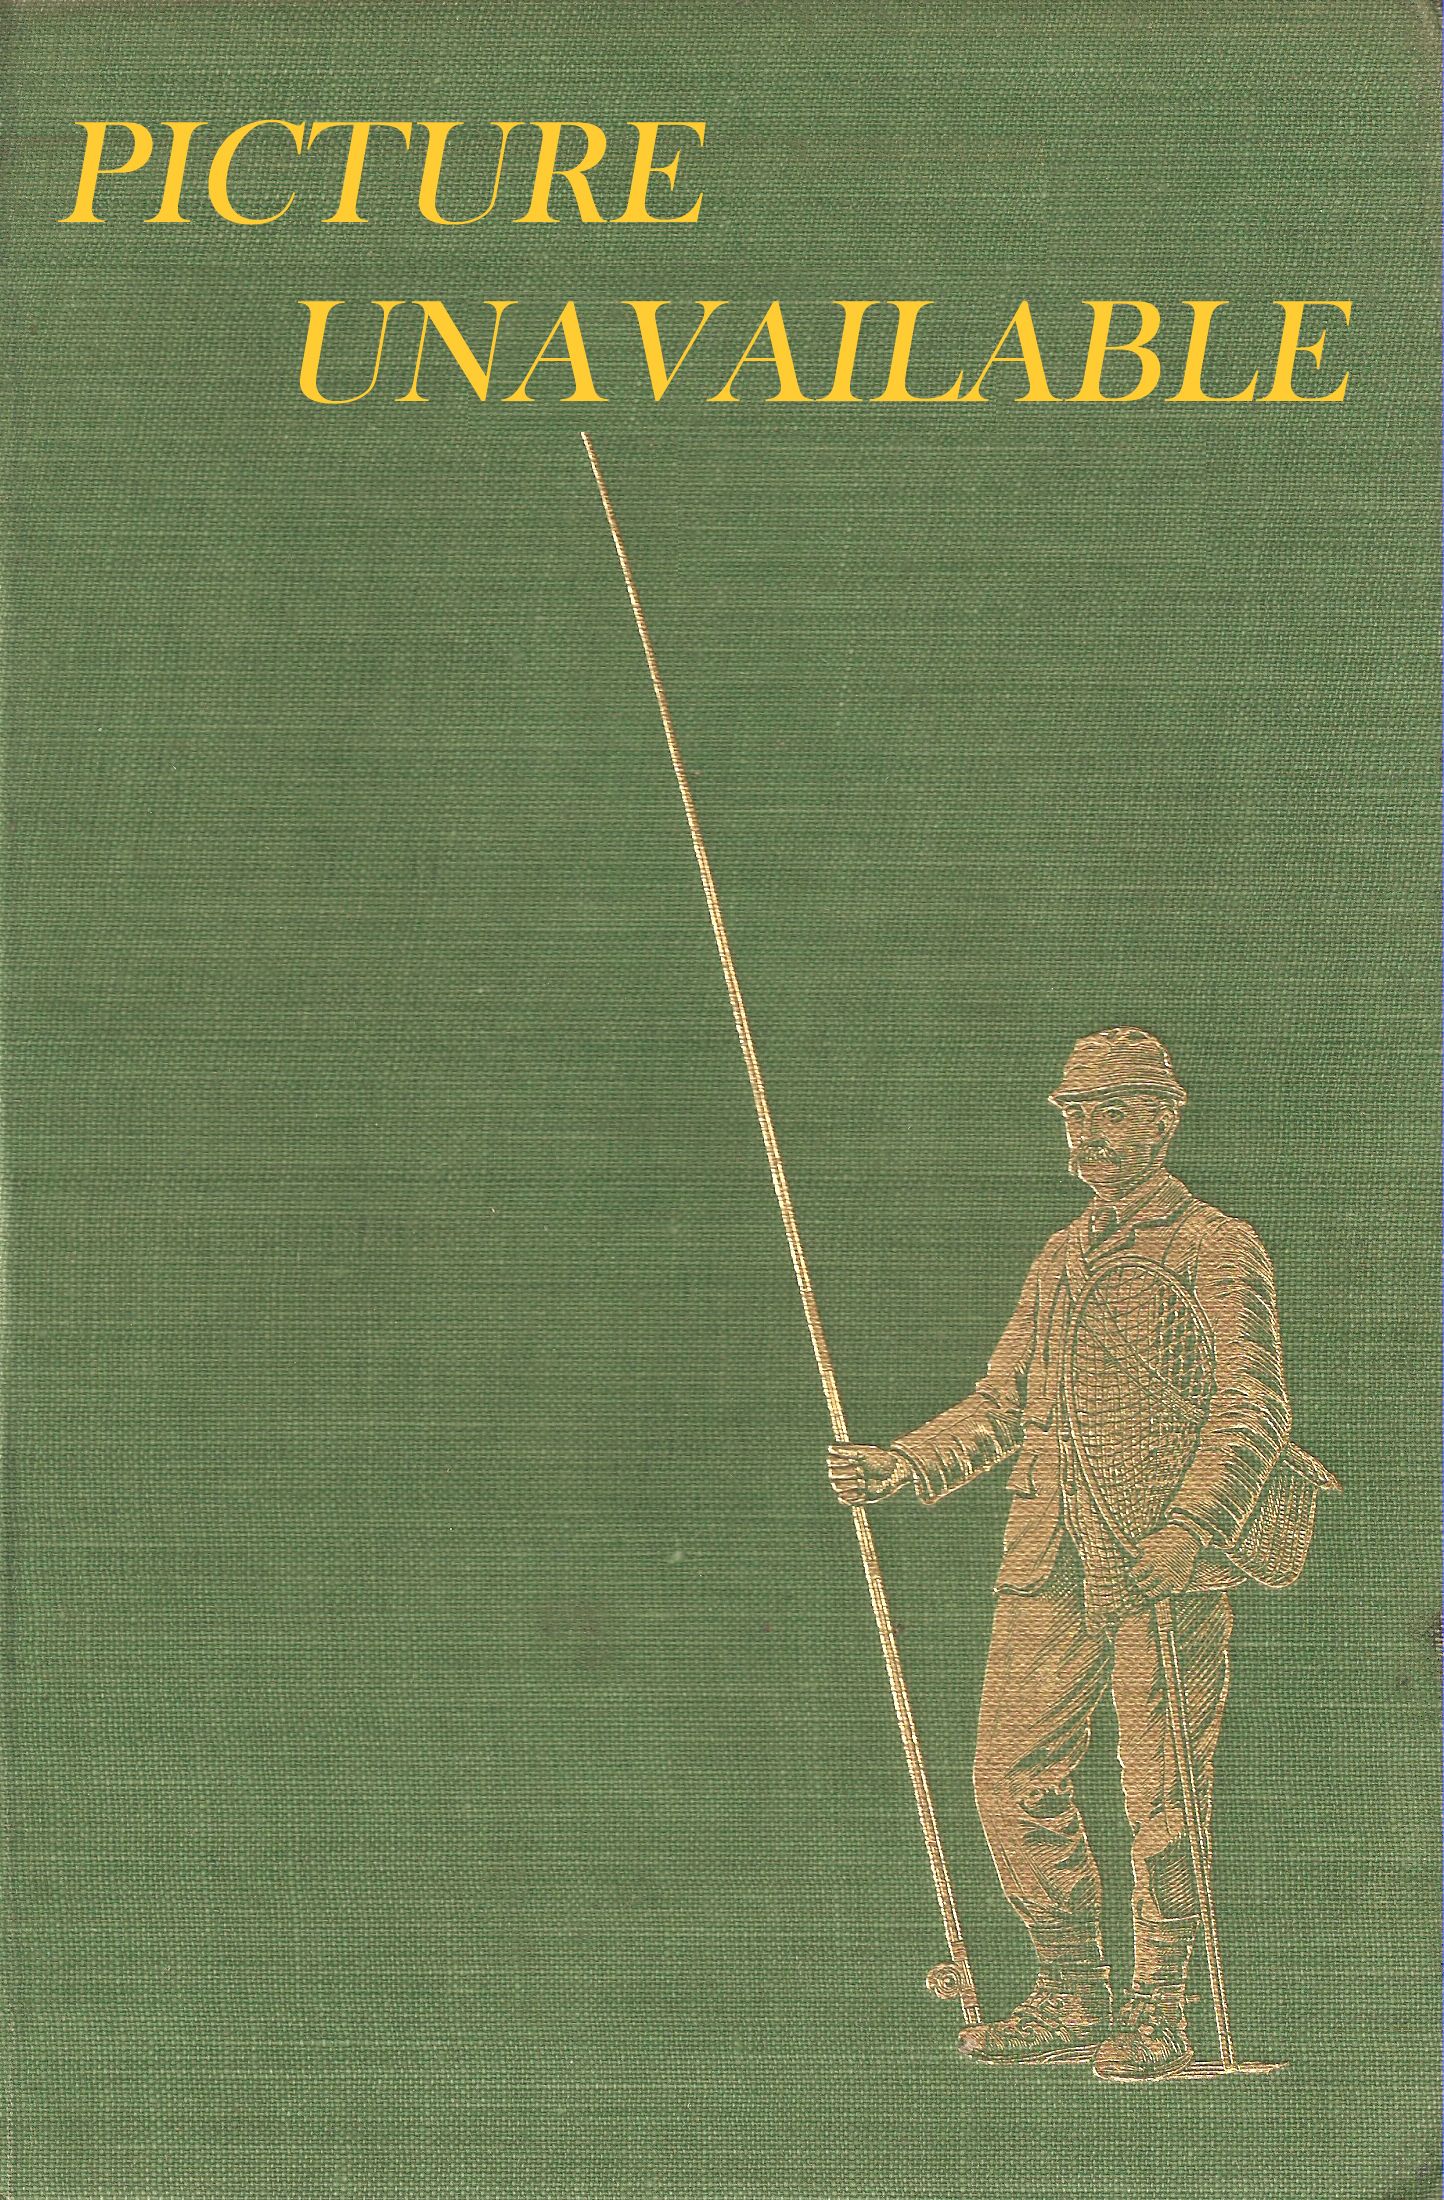 THE COMPLEAT ANGLER, or the Contemplative Man's Recreation: being a  discourse of Fish and Fishing not unworthy the perusal of most Anglers. By  Izaak Walton. A New Edition with an Introduction by Andrew Lang, and  illustrated by E.J. Sullivan. Coigney 17